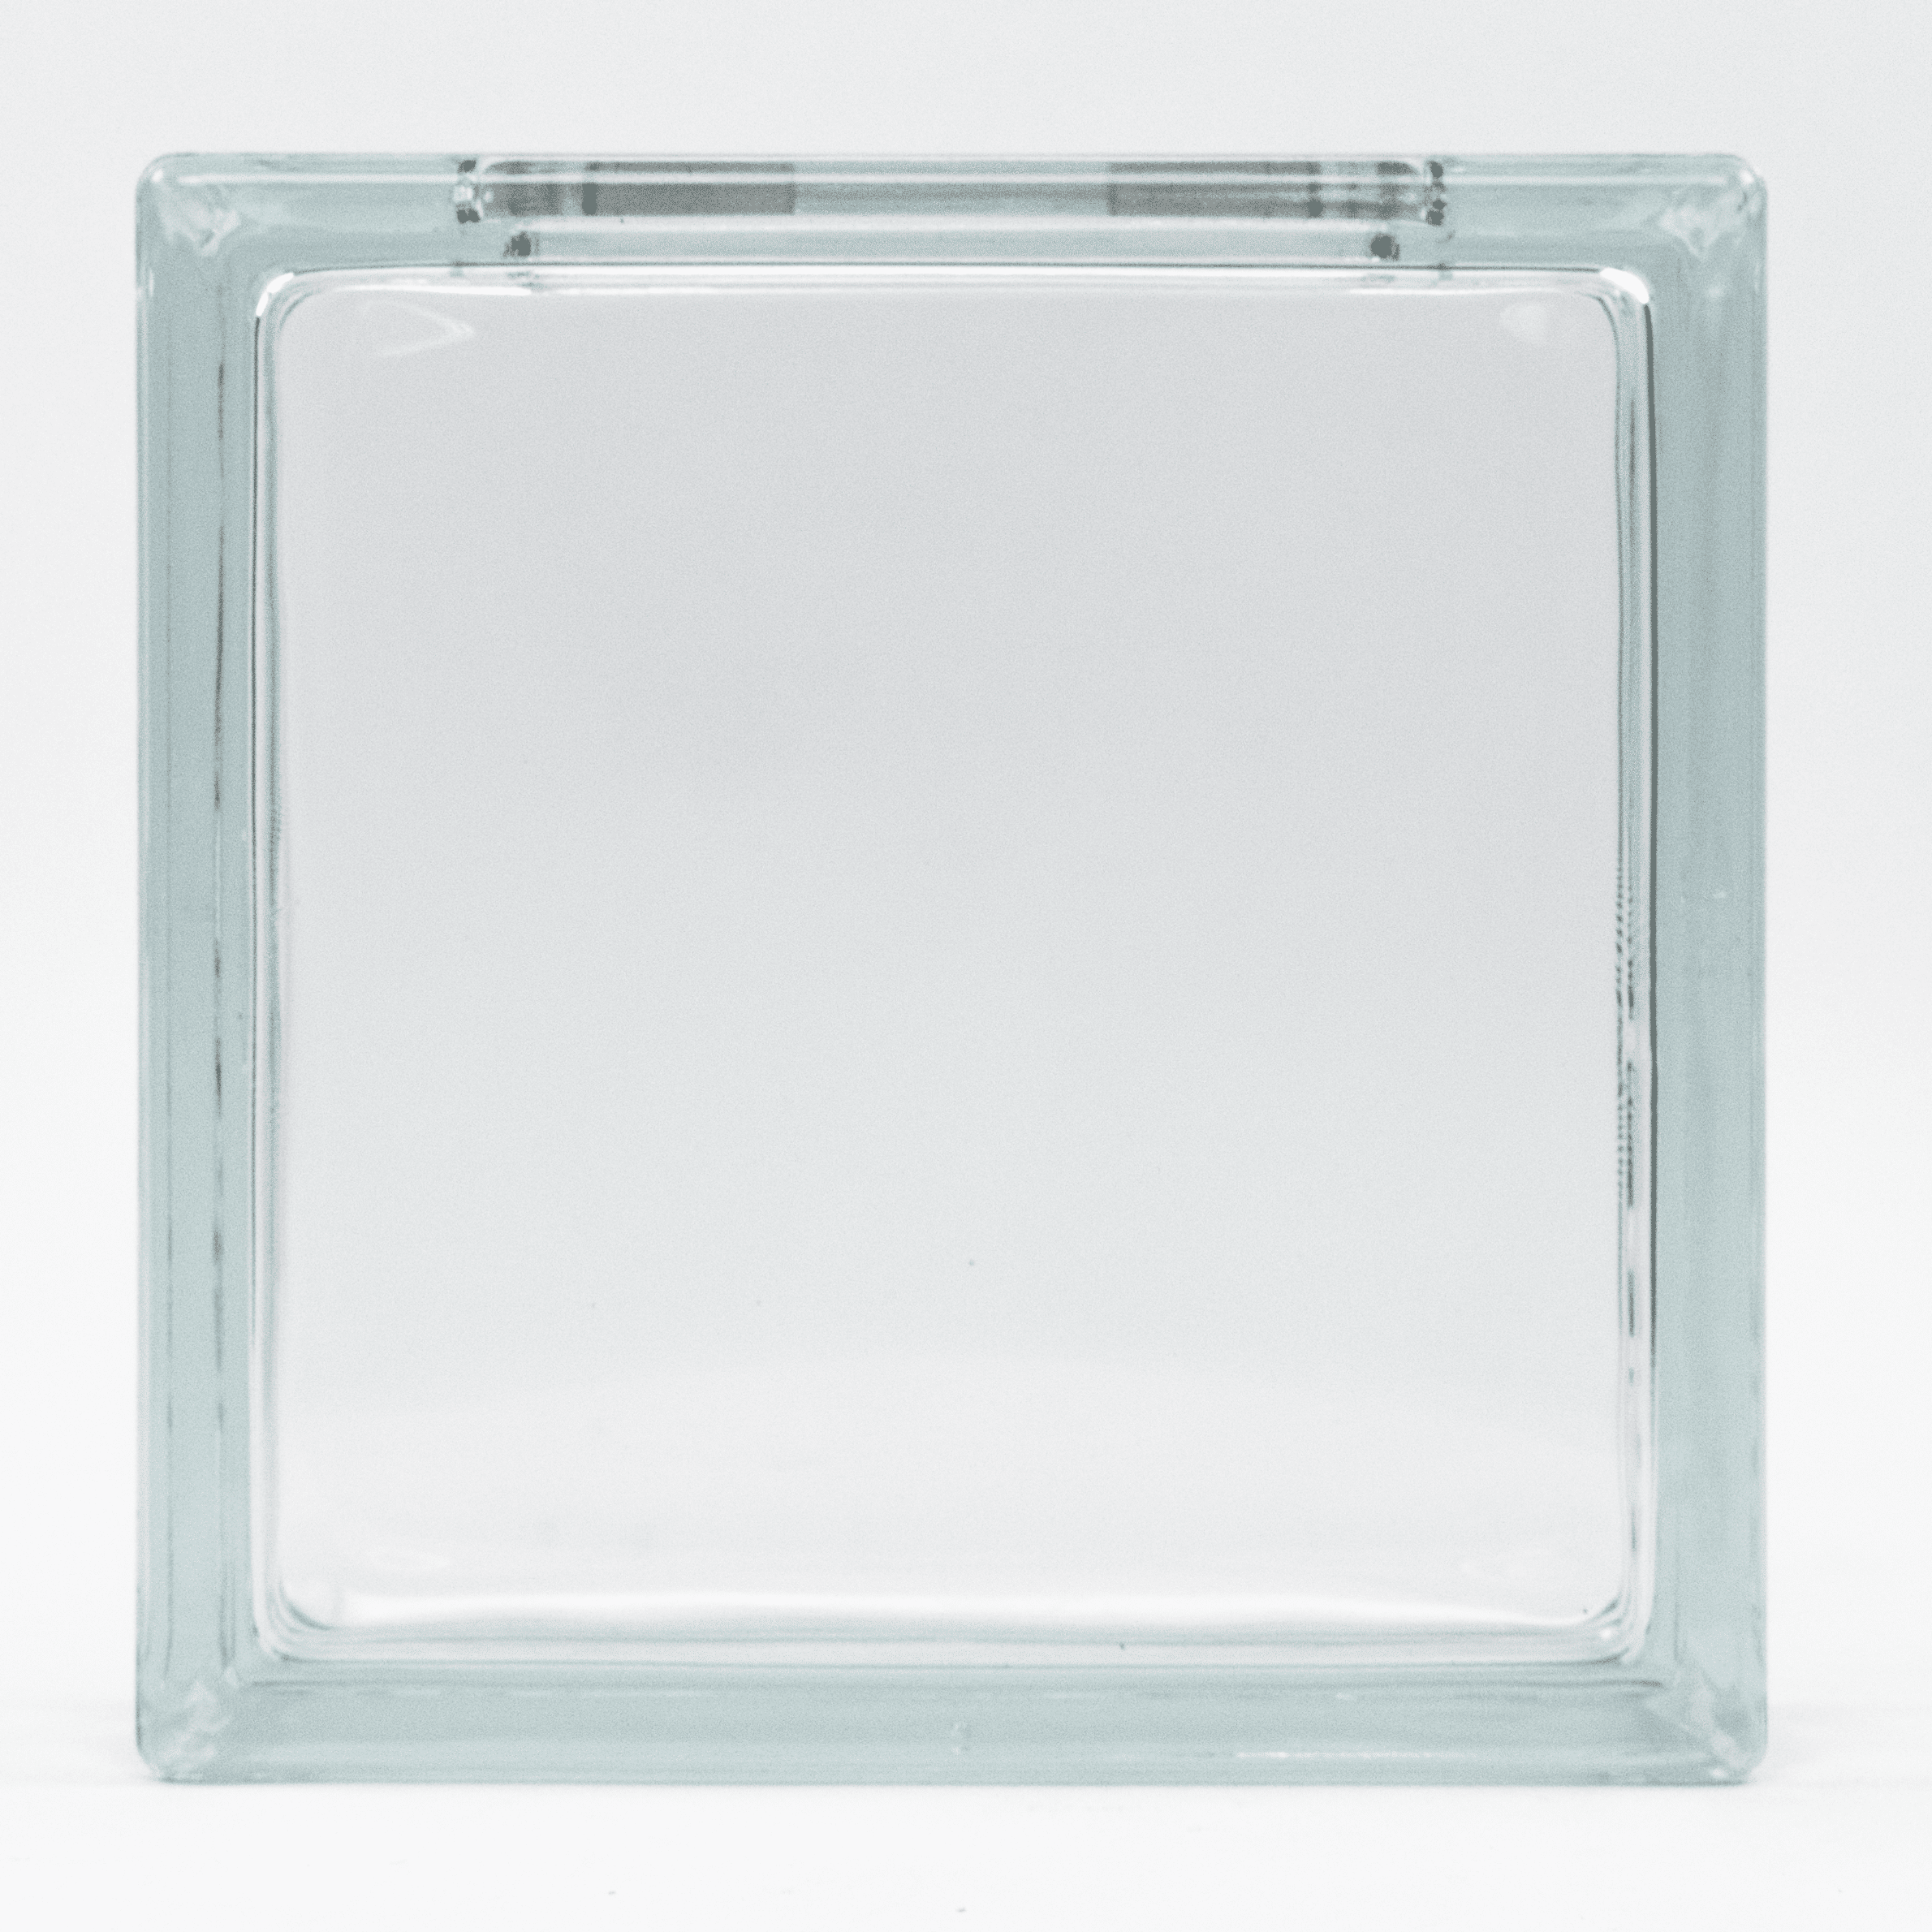 Case Quantitiy Of 6 Glass Block For Crafts 7 1/2”X7 1/1/2”X 3” W/ Light Hole